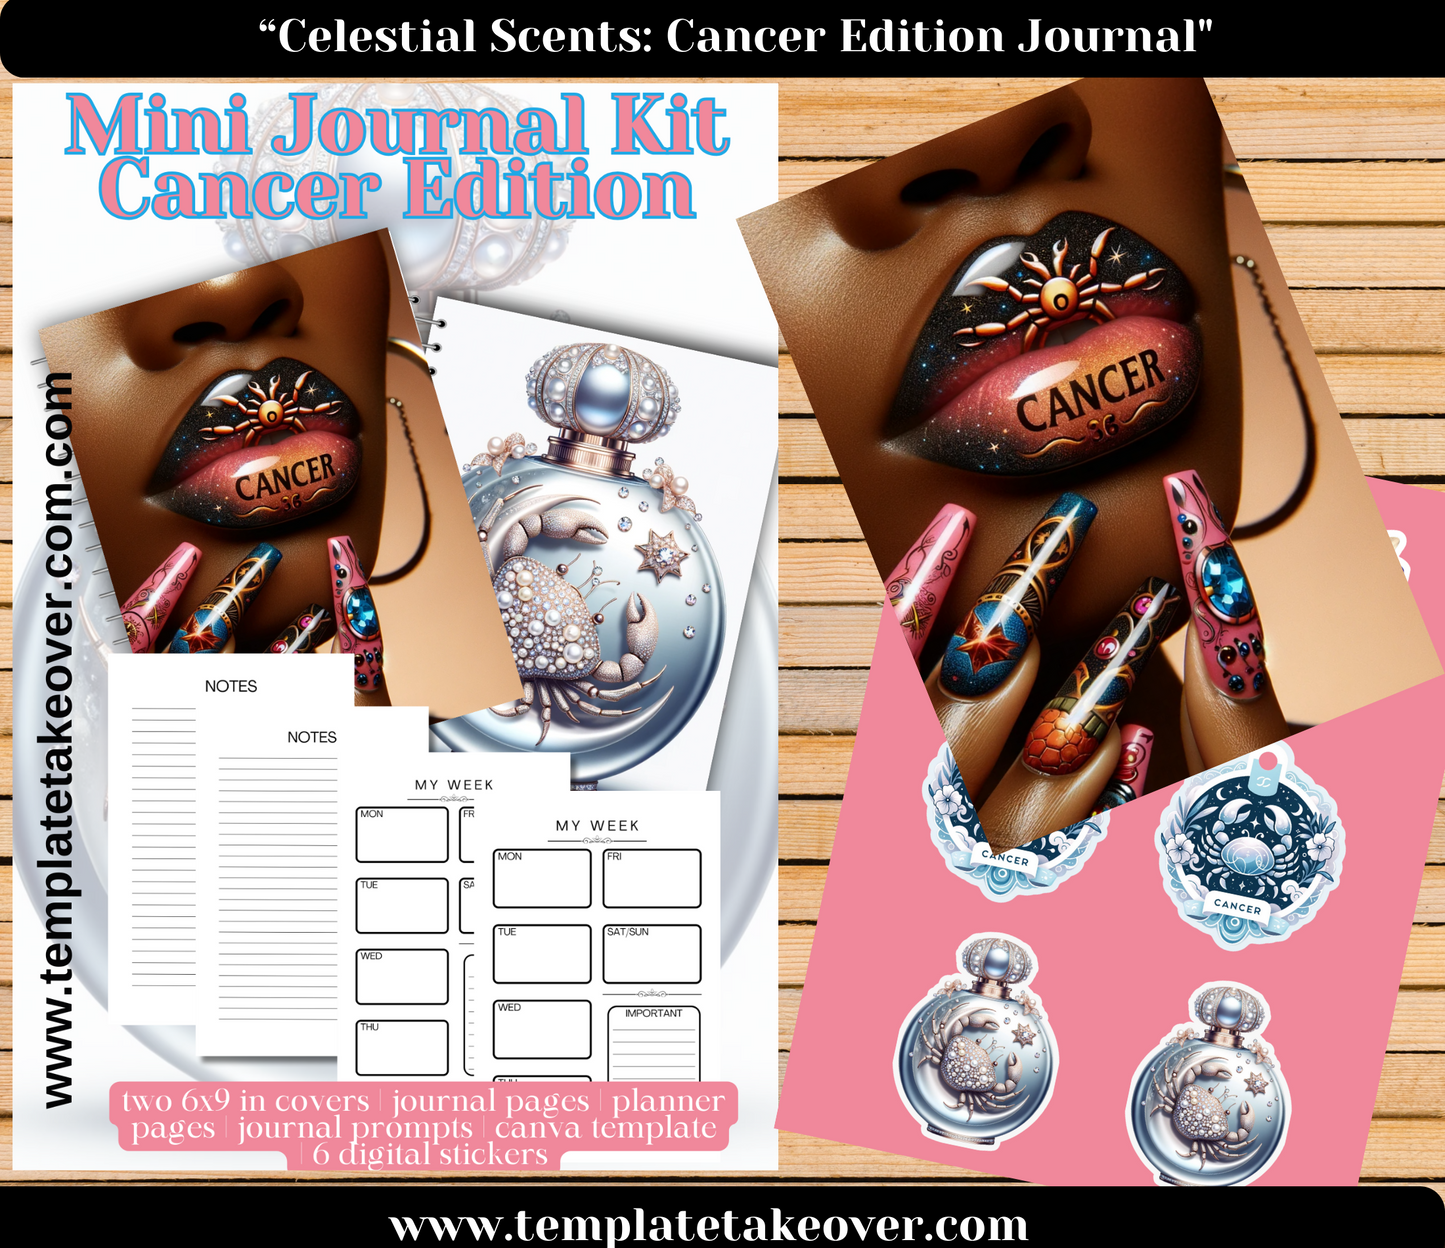 Celestial Scents: Cancer Edition Journal: Perfect for Crafters, Creatives, Coaches, and More - Set of 2 Covers, 15 Journal Pages, 5 Planner Pages, 15 Prompts and 6 Digital Stickers. Volume 3